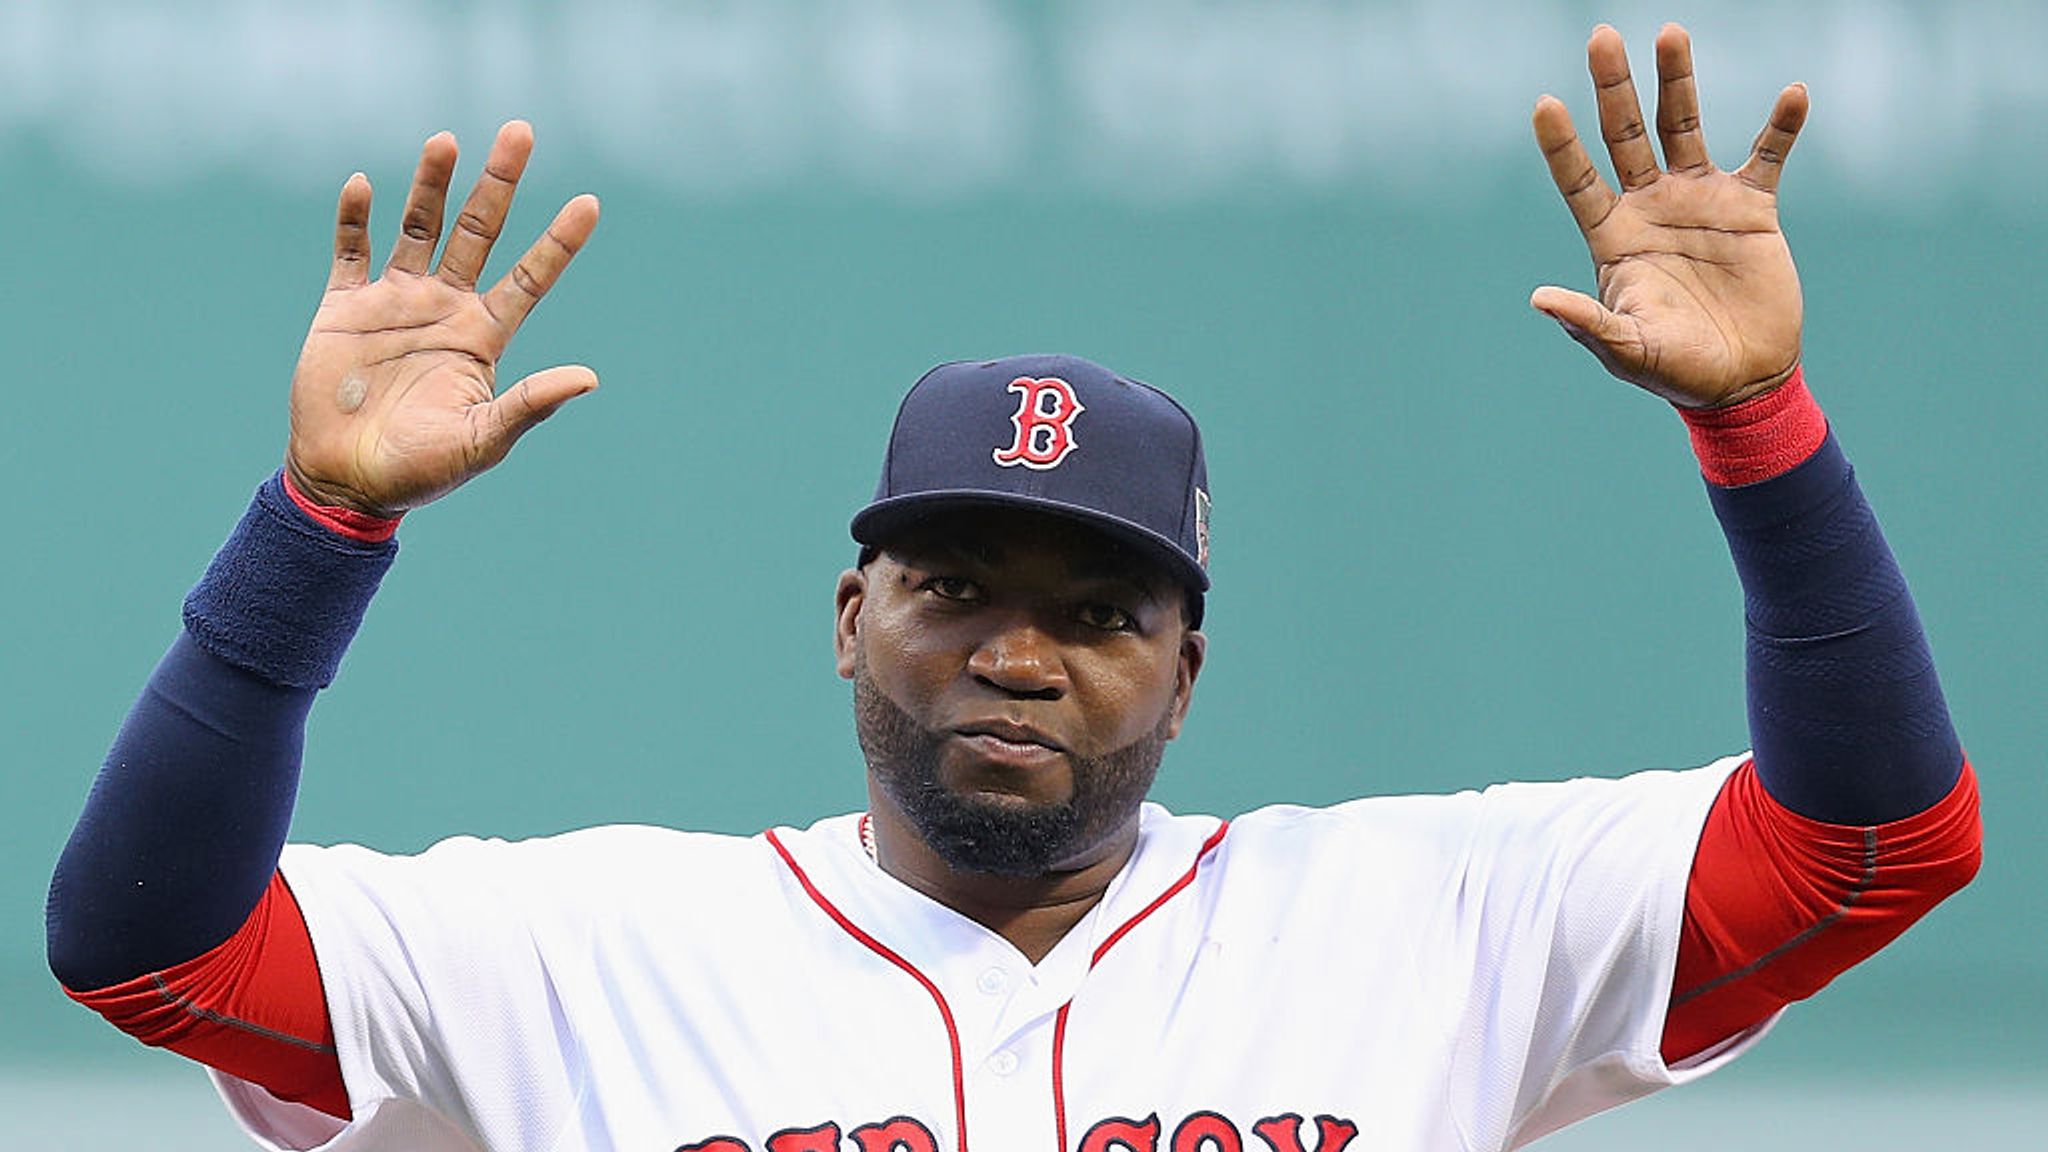 David Ortiz recovering after 3rd surgery stemming from gunshot wound